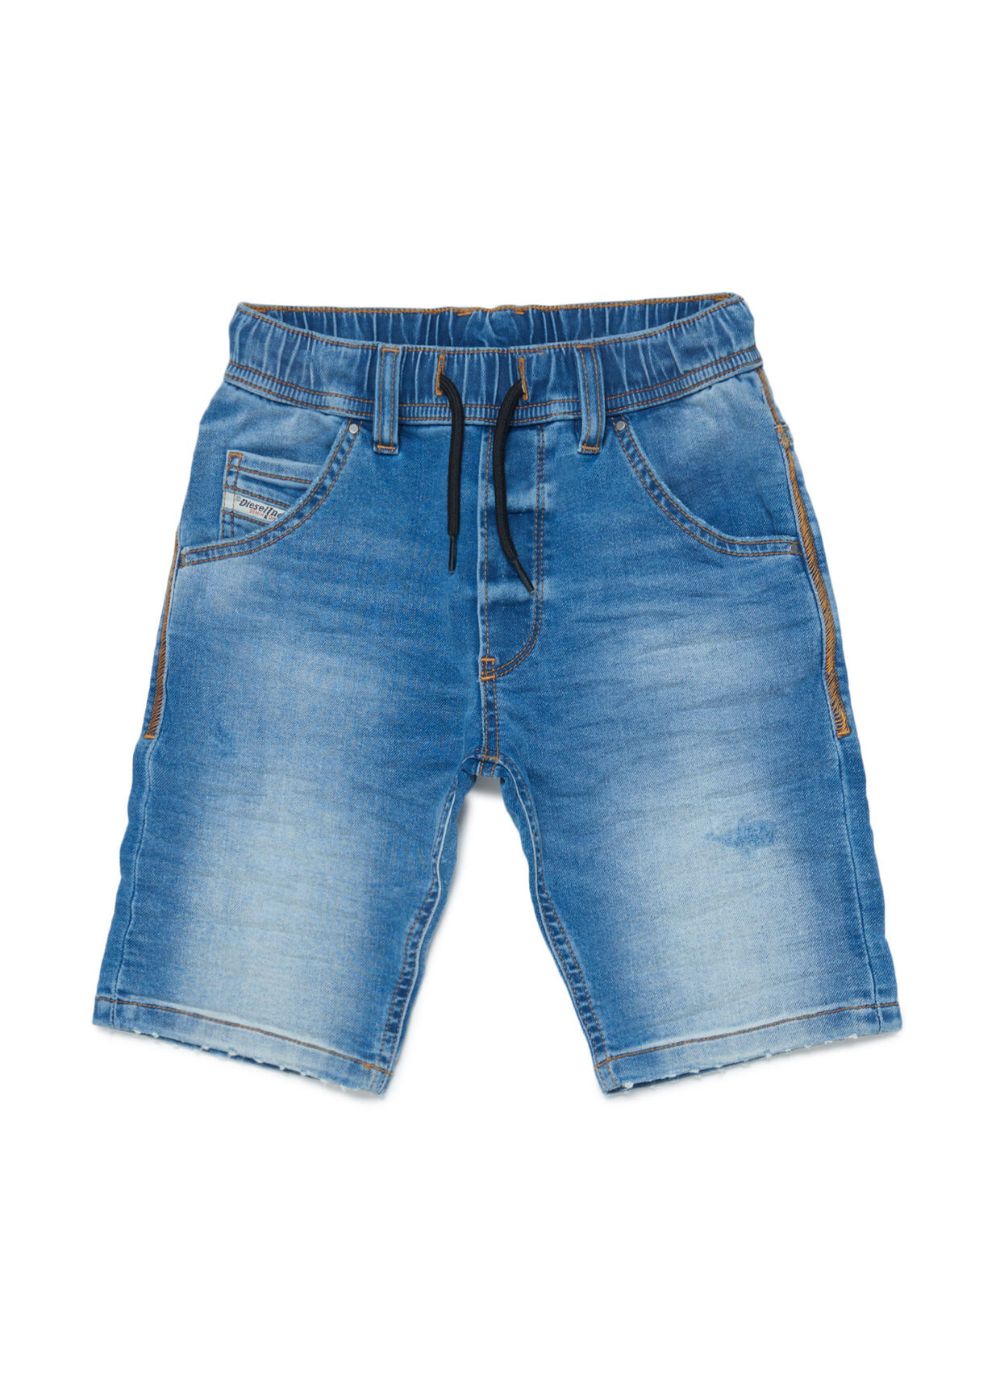 Featured image for “Diesel Shorts In Denim”